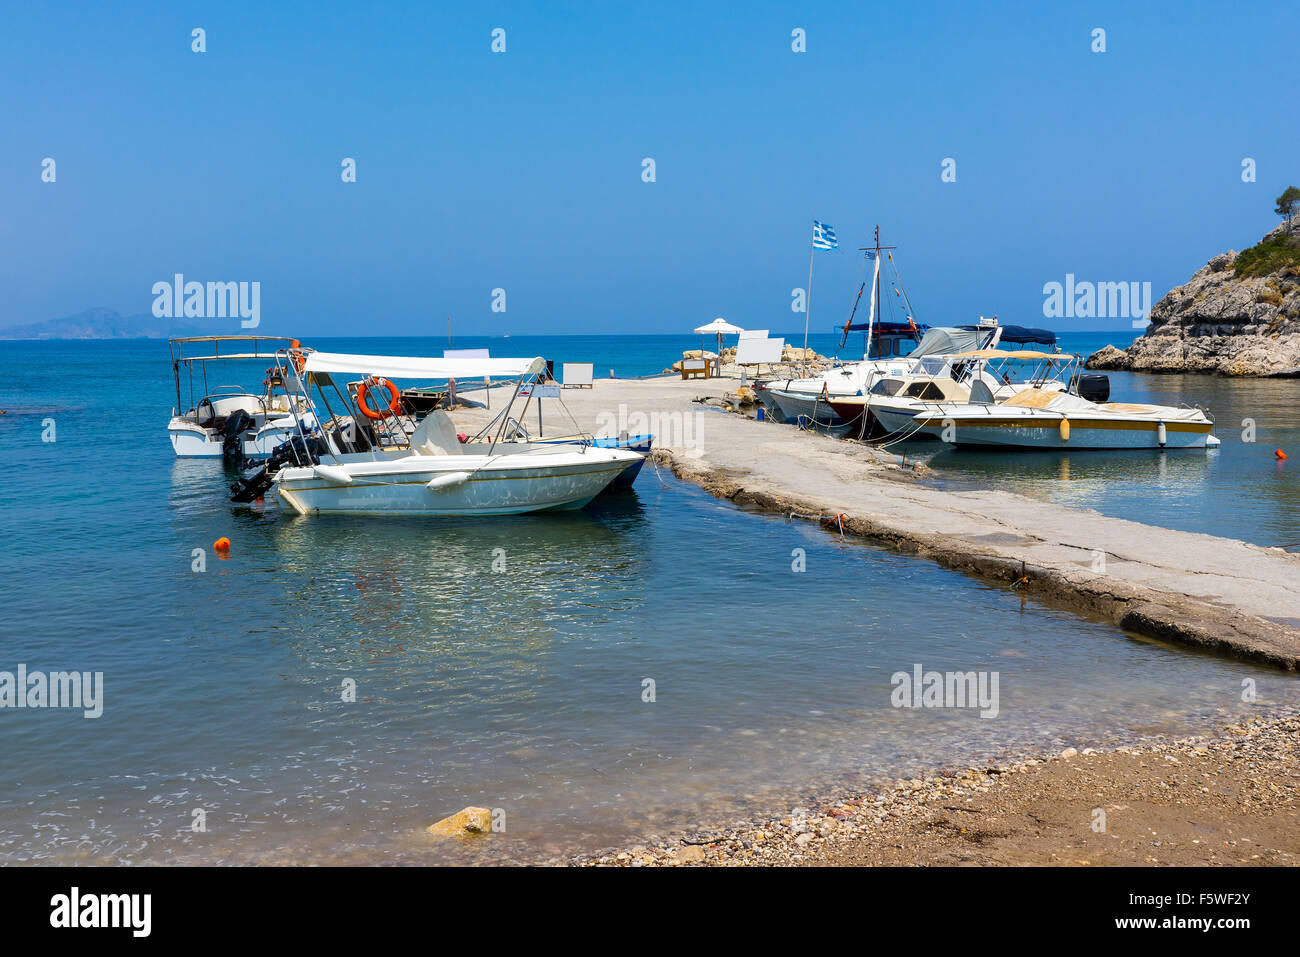 Fishing boats moored at Kolymbia Rhodes Dodecanese Greece Europe Stock Photo